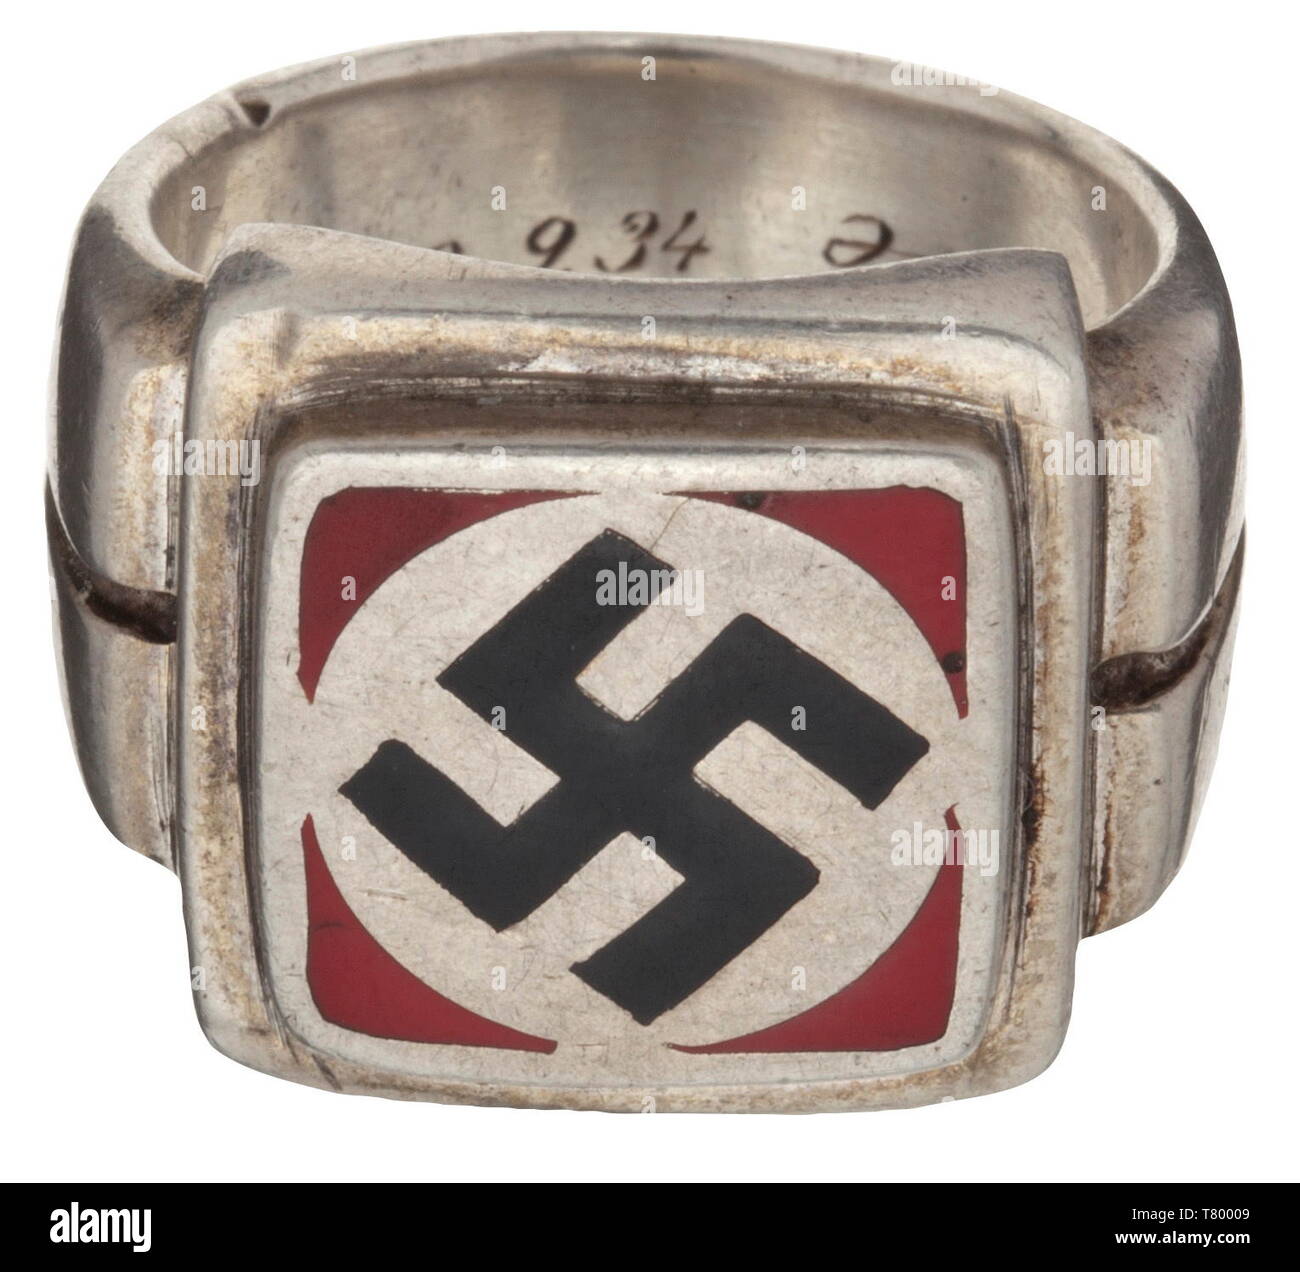 Richard Kolb (1891 - 1945) - Julius Streicher (1885 - 1946). A silver honour ring in art déco style with applied enamelled swastika, the inner surface engraved with dedication 's/l Kolb 12.9.34 Streicher'. An honour ring in martial style from the Gauleiter of Franconia to SA staff member and 'Blood Order wearer' Kolb. Kolb, who was also an SS-Ehrenführer and from 1933 to 1934 intendant of Bavarian Broadcasting, won the Knight's Cross of the Iron Cross in 1941. He was thus one of the few 'political soldiers' who, apart from the most respected award of the NSDAP, was also ent, Editorial-Use-Only Stock Photo